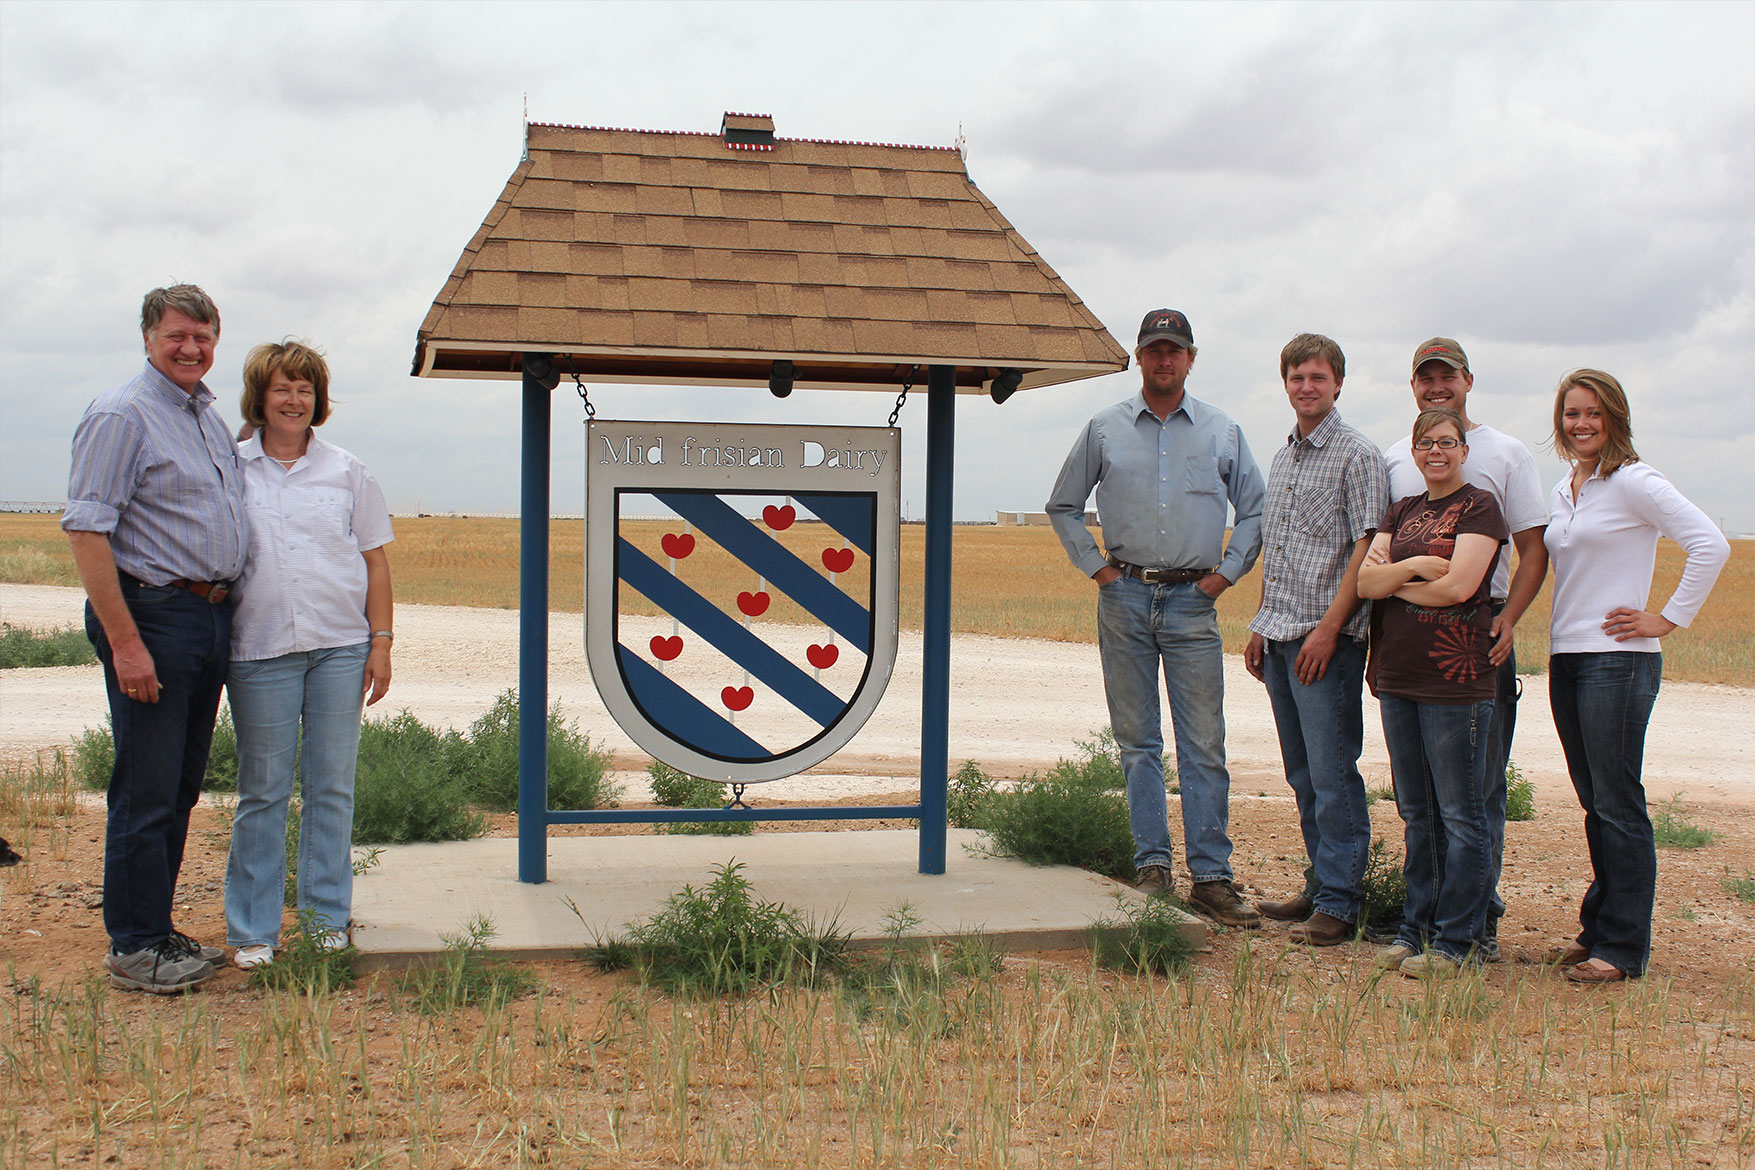 The van der Ploeg family poses with their dairy's sign.